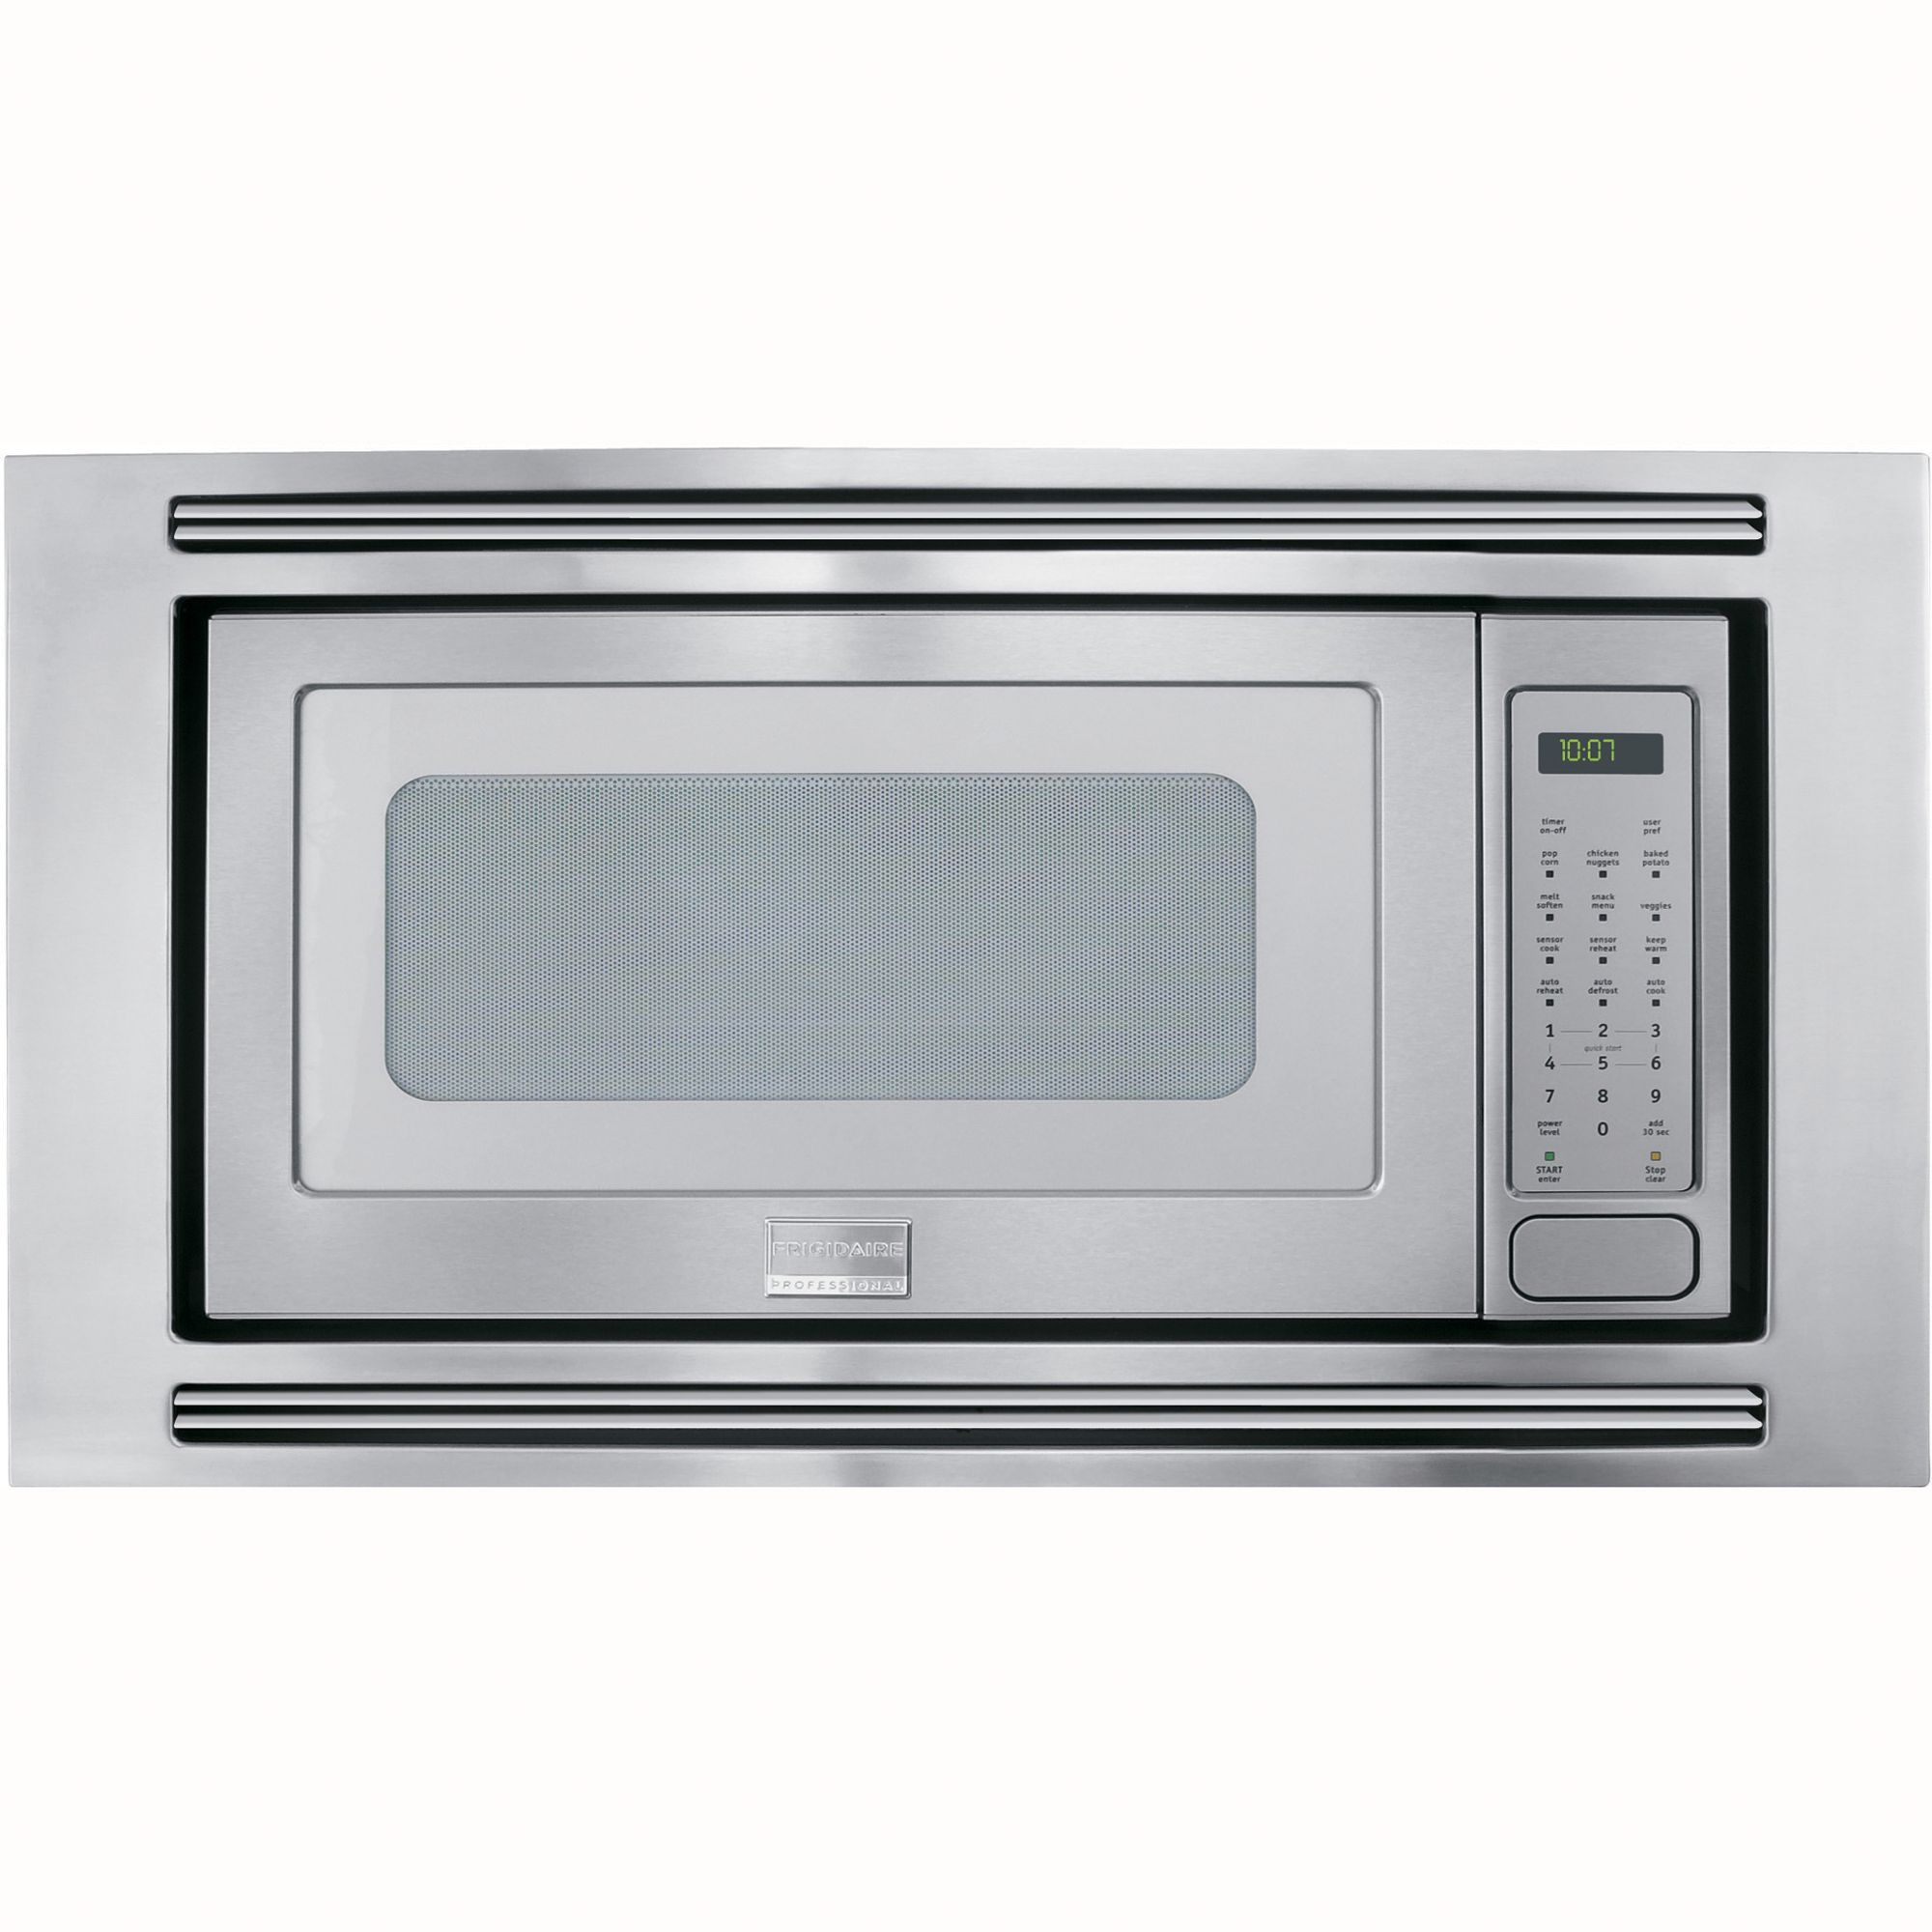 Frigidaire 24 2.0 cu. ft. Built-In Microwave Oven Stainless steel